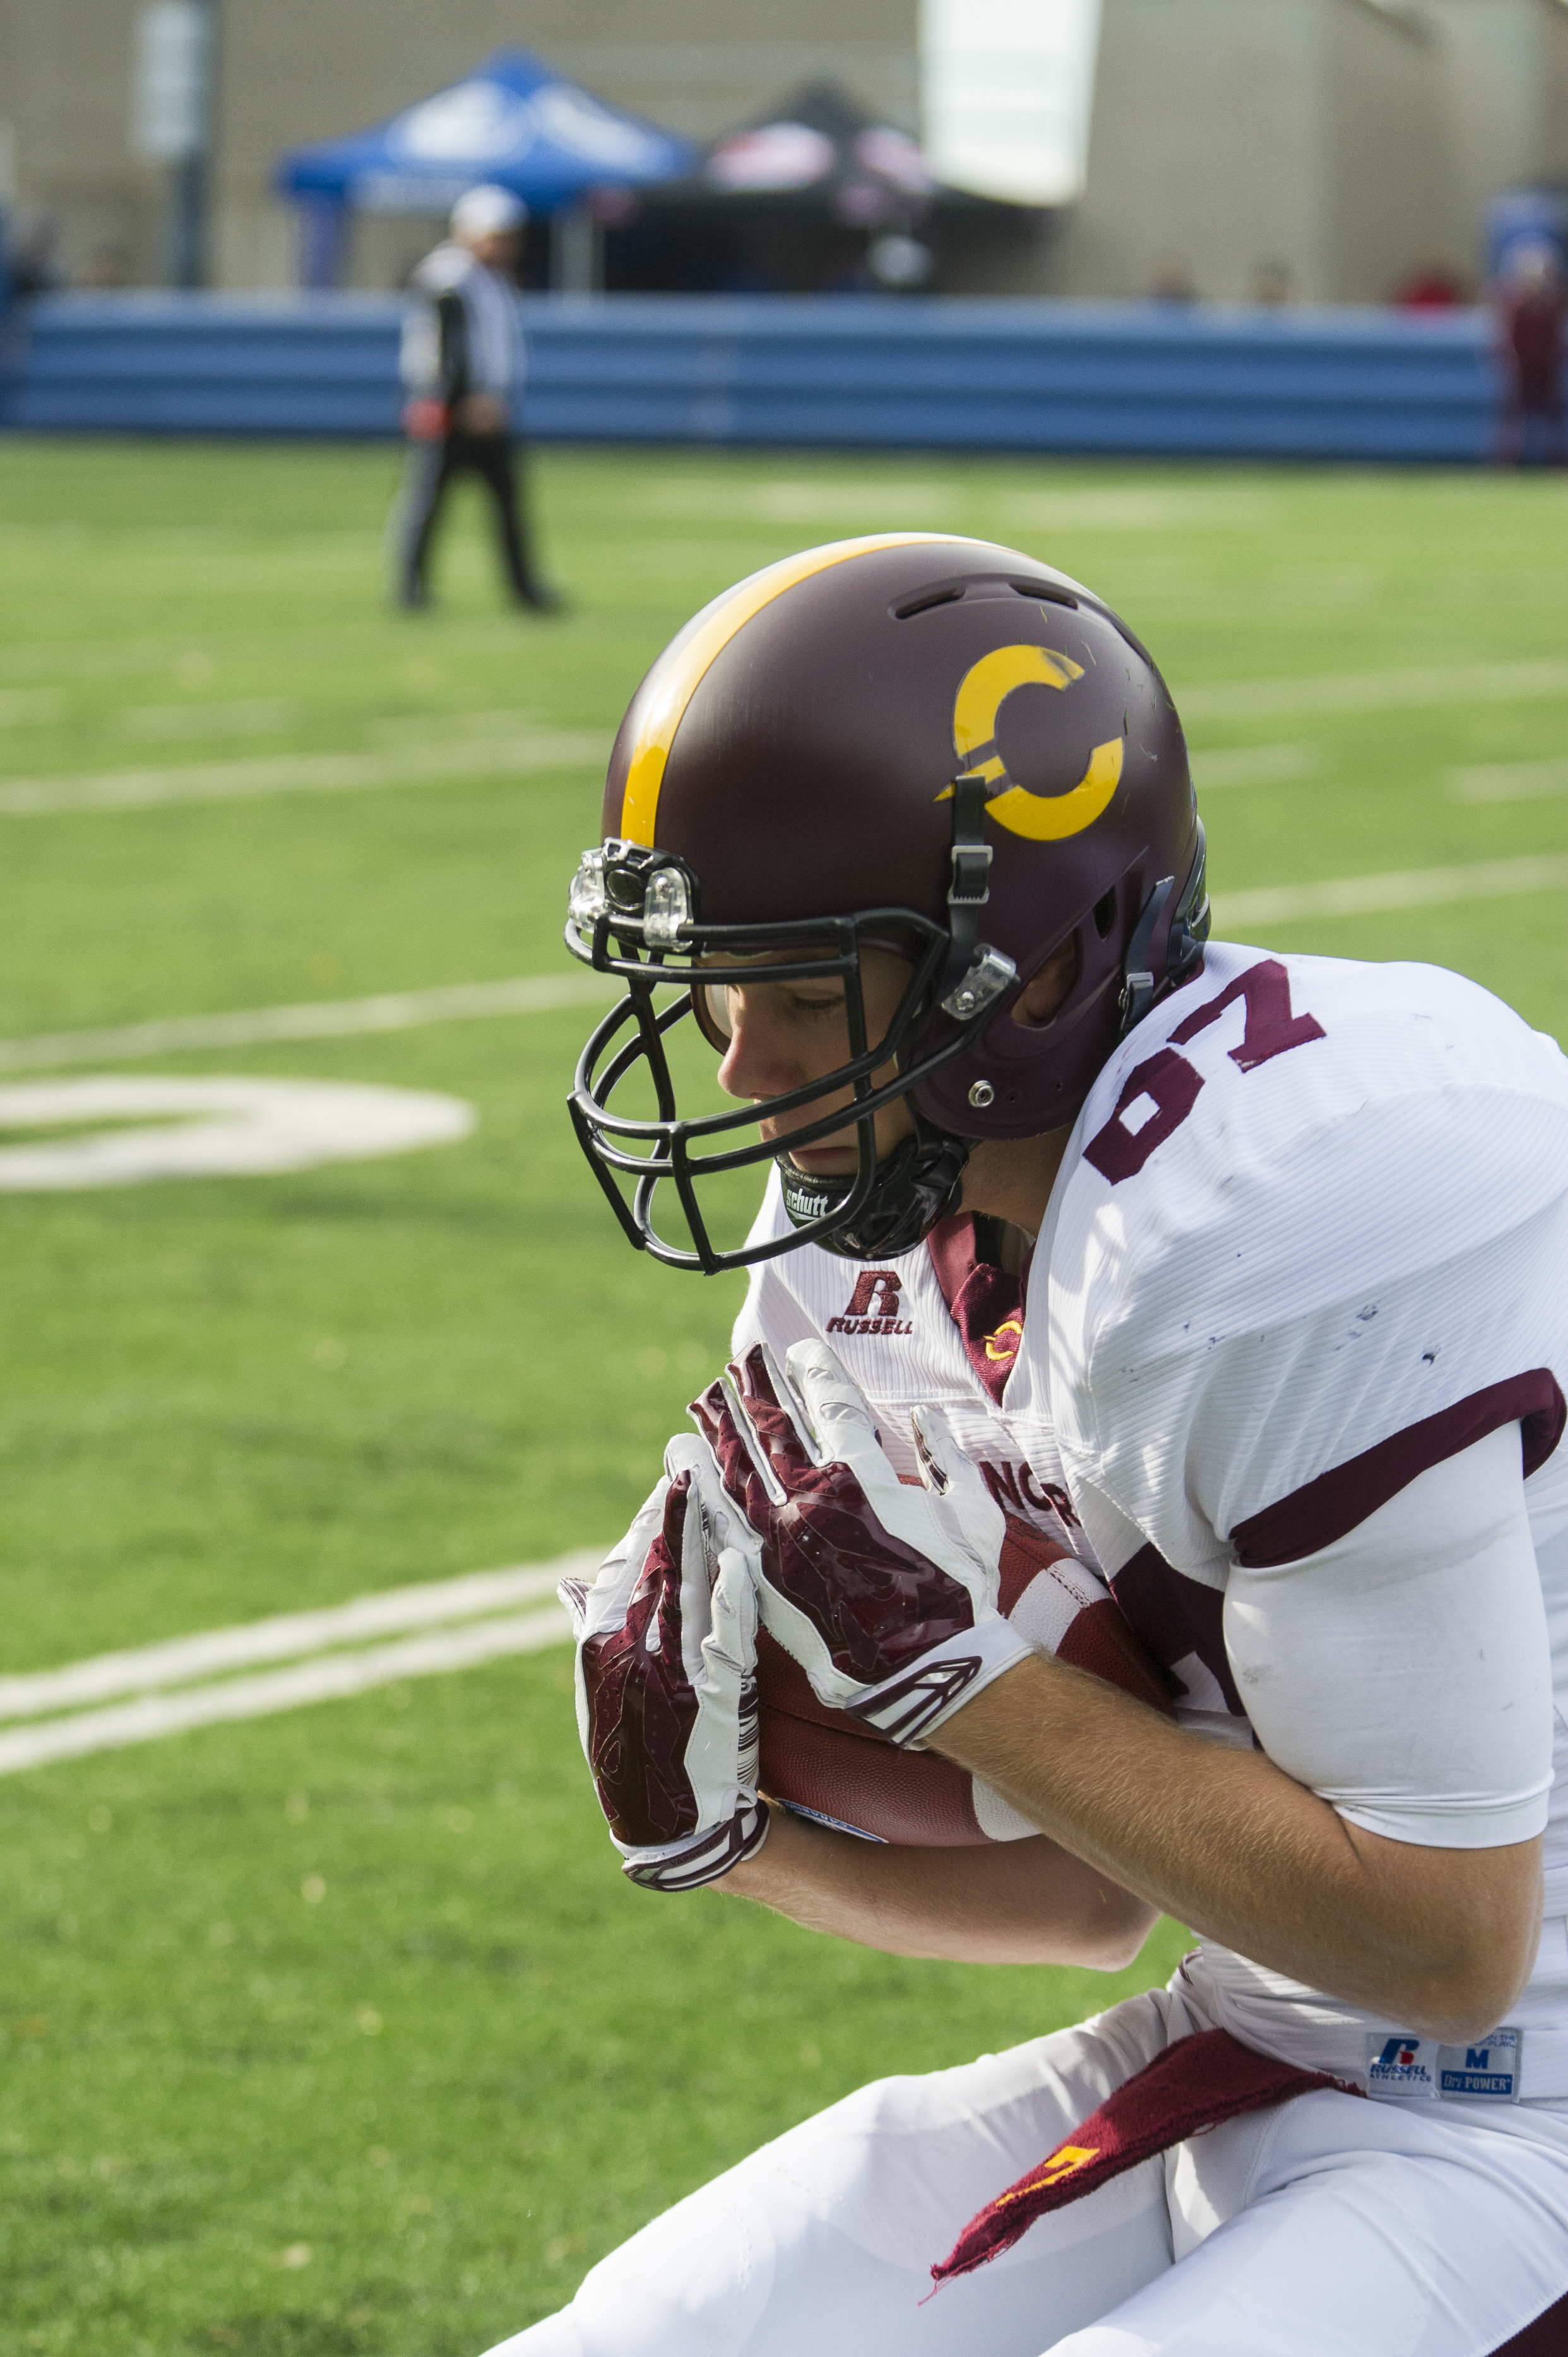 Slotback Anthony Aubry catches a ball near the sideline during Saturday’s game. Photo by Andrej Ivanov.